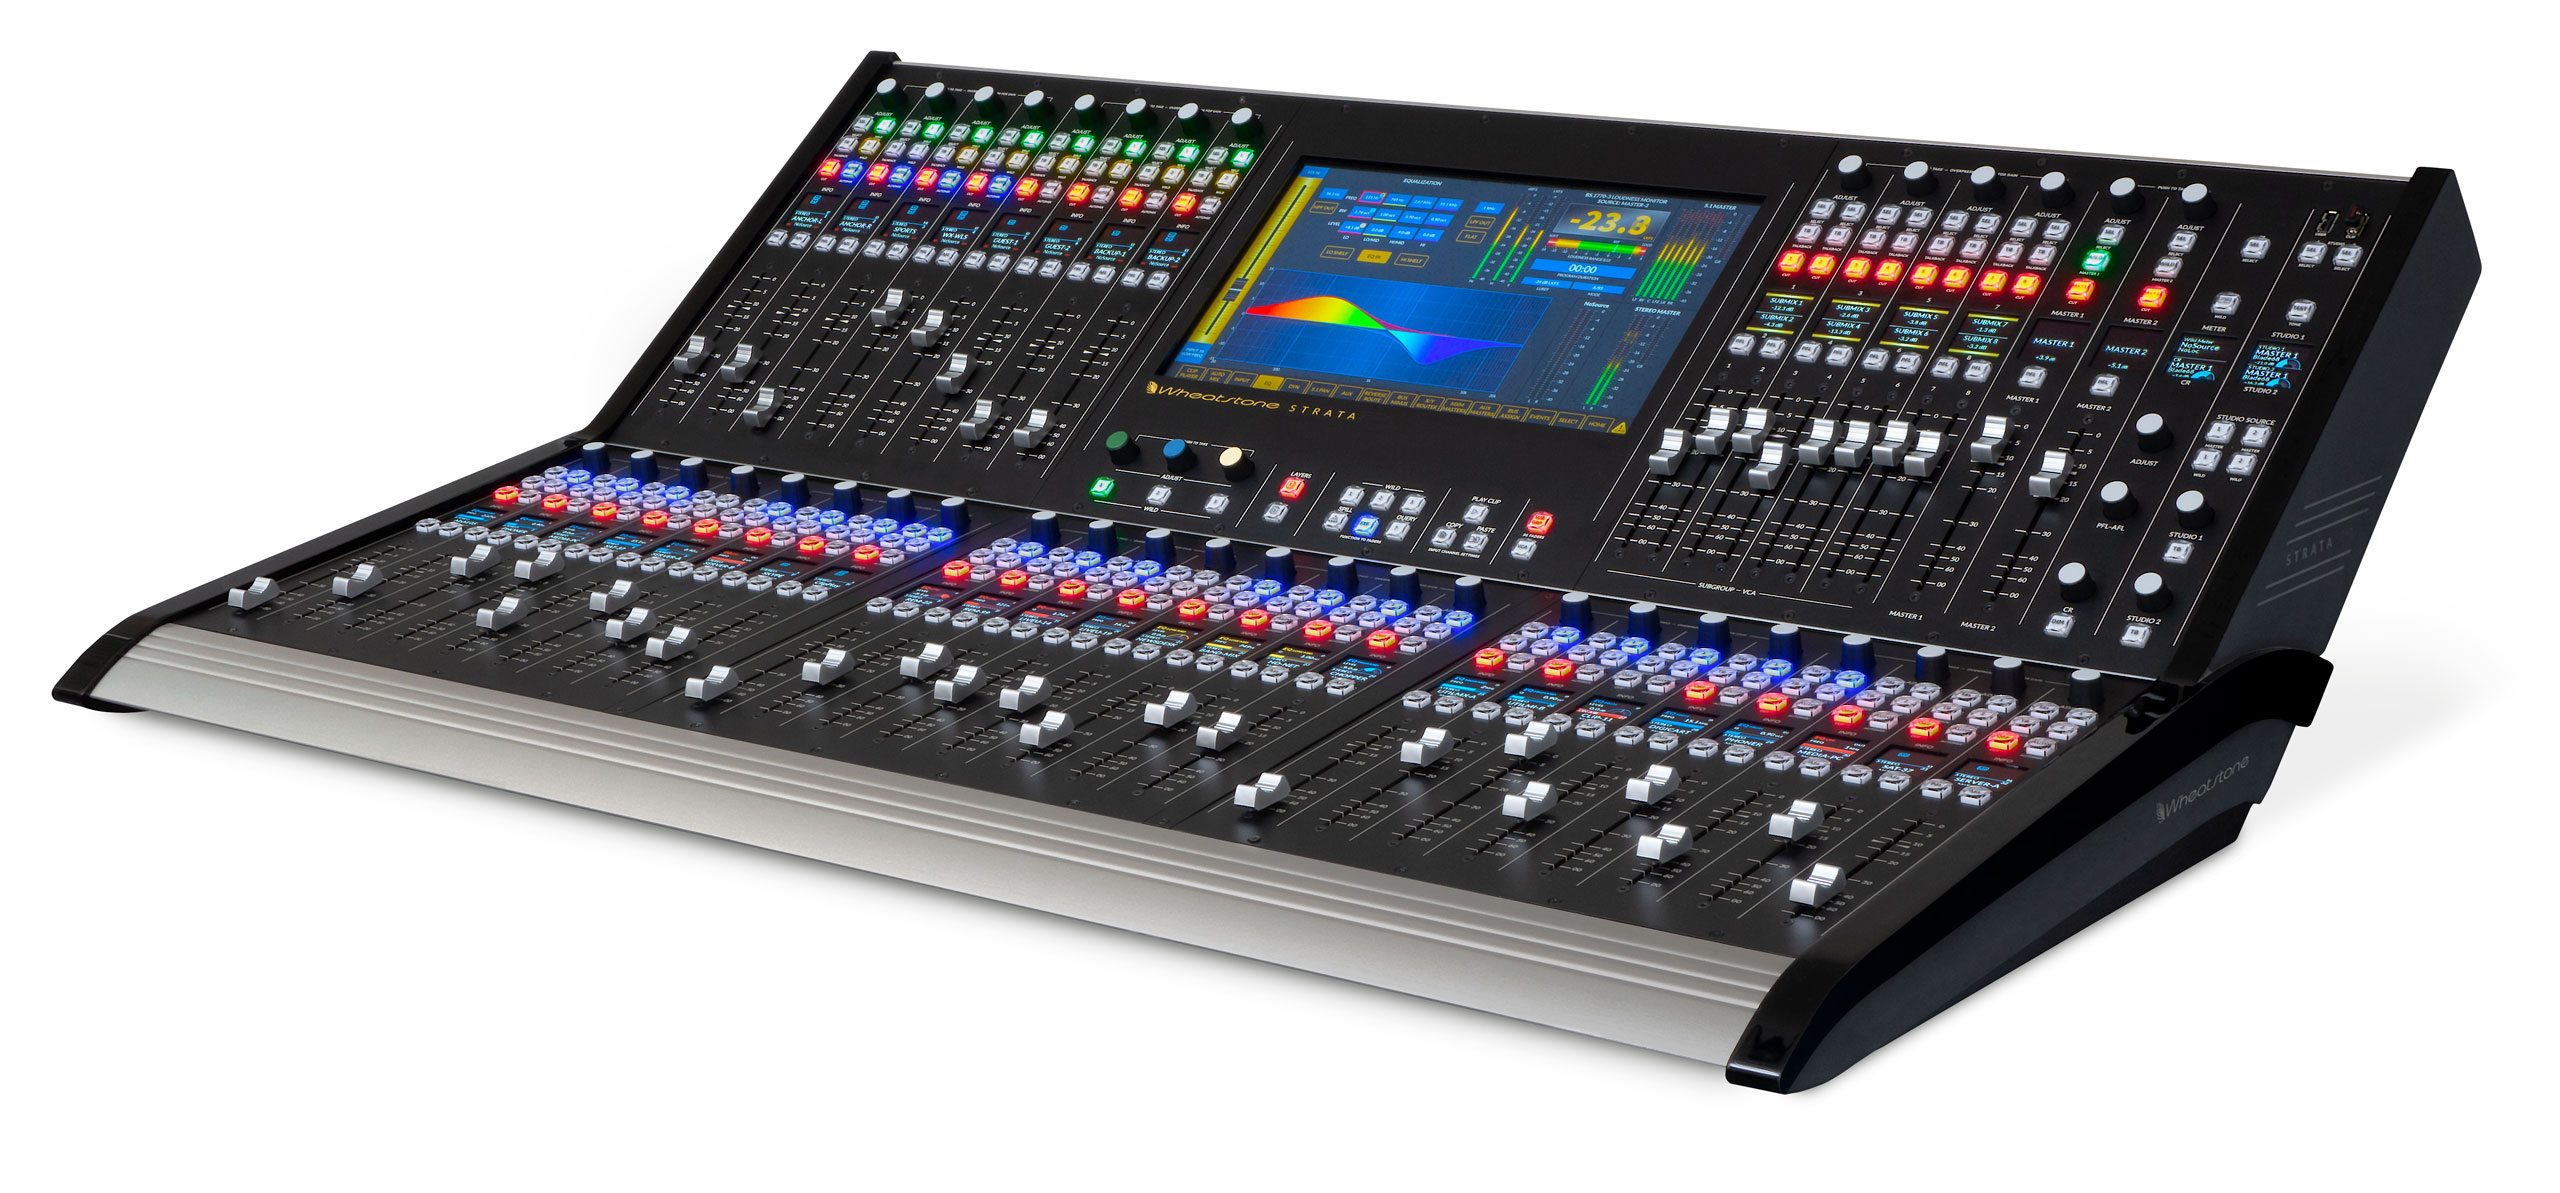 WHEATSTONE TO SHOW COMPACT IP AUDIO CONSOLE AT IBC